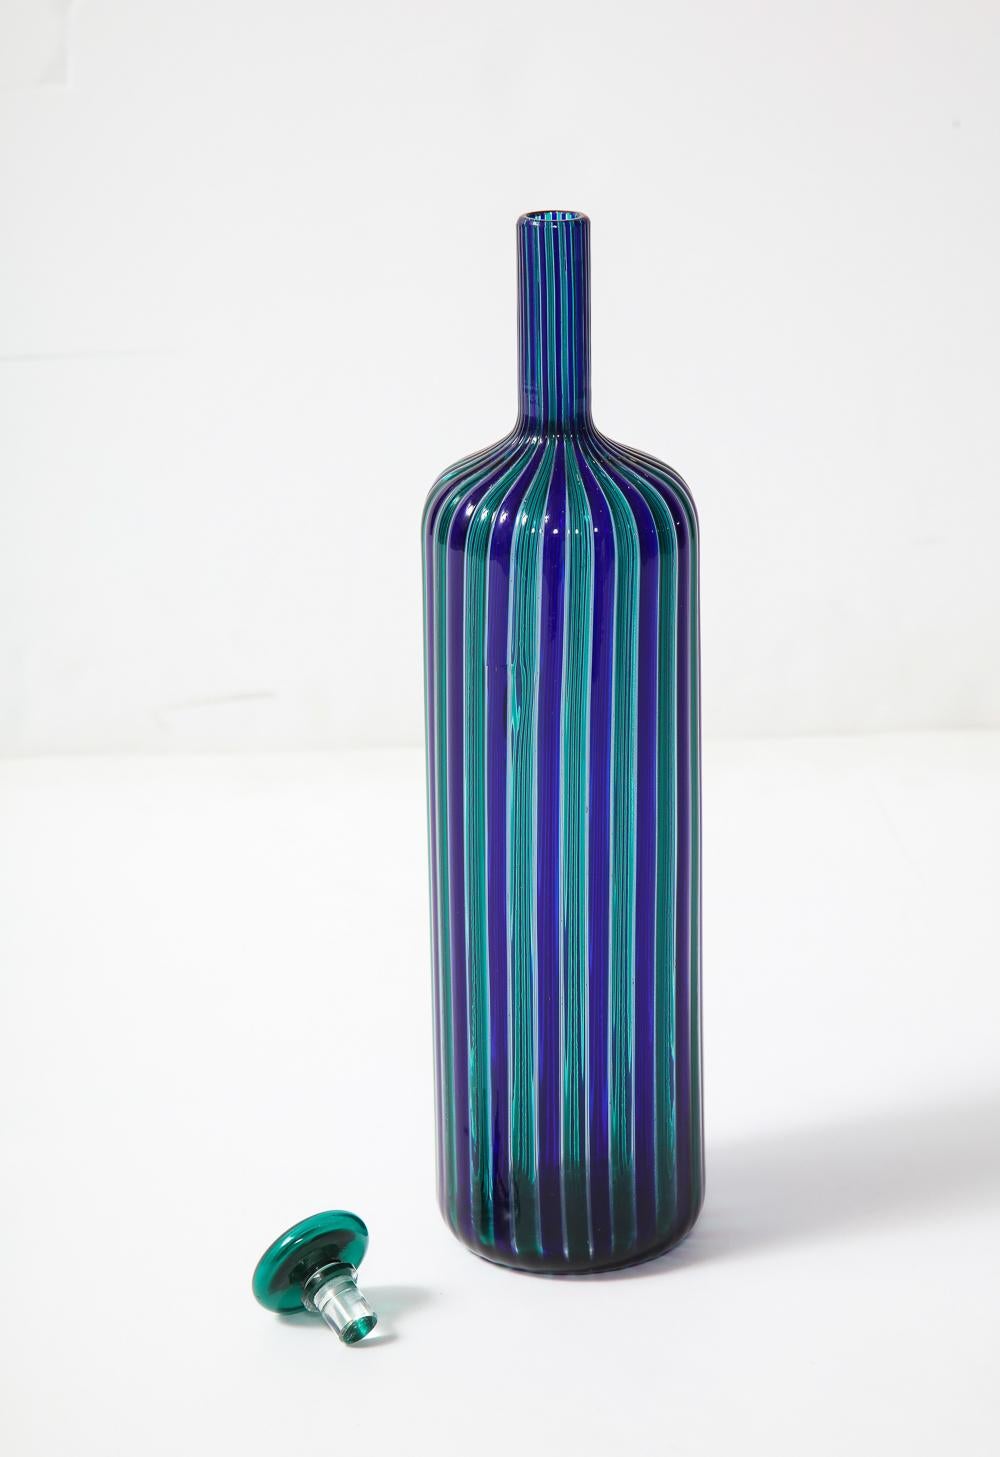 Blown glass bottle form created with canes of blue & green colors.